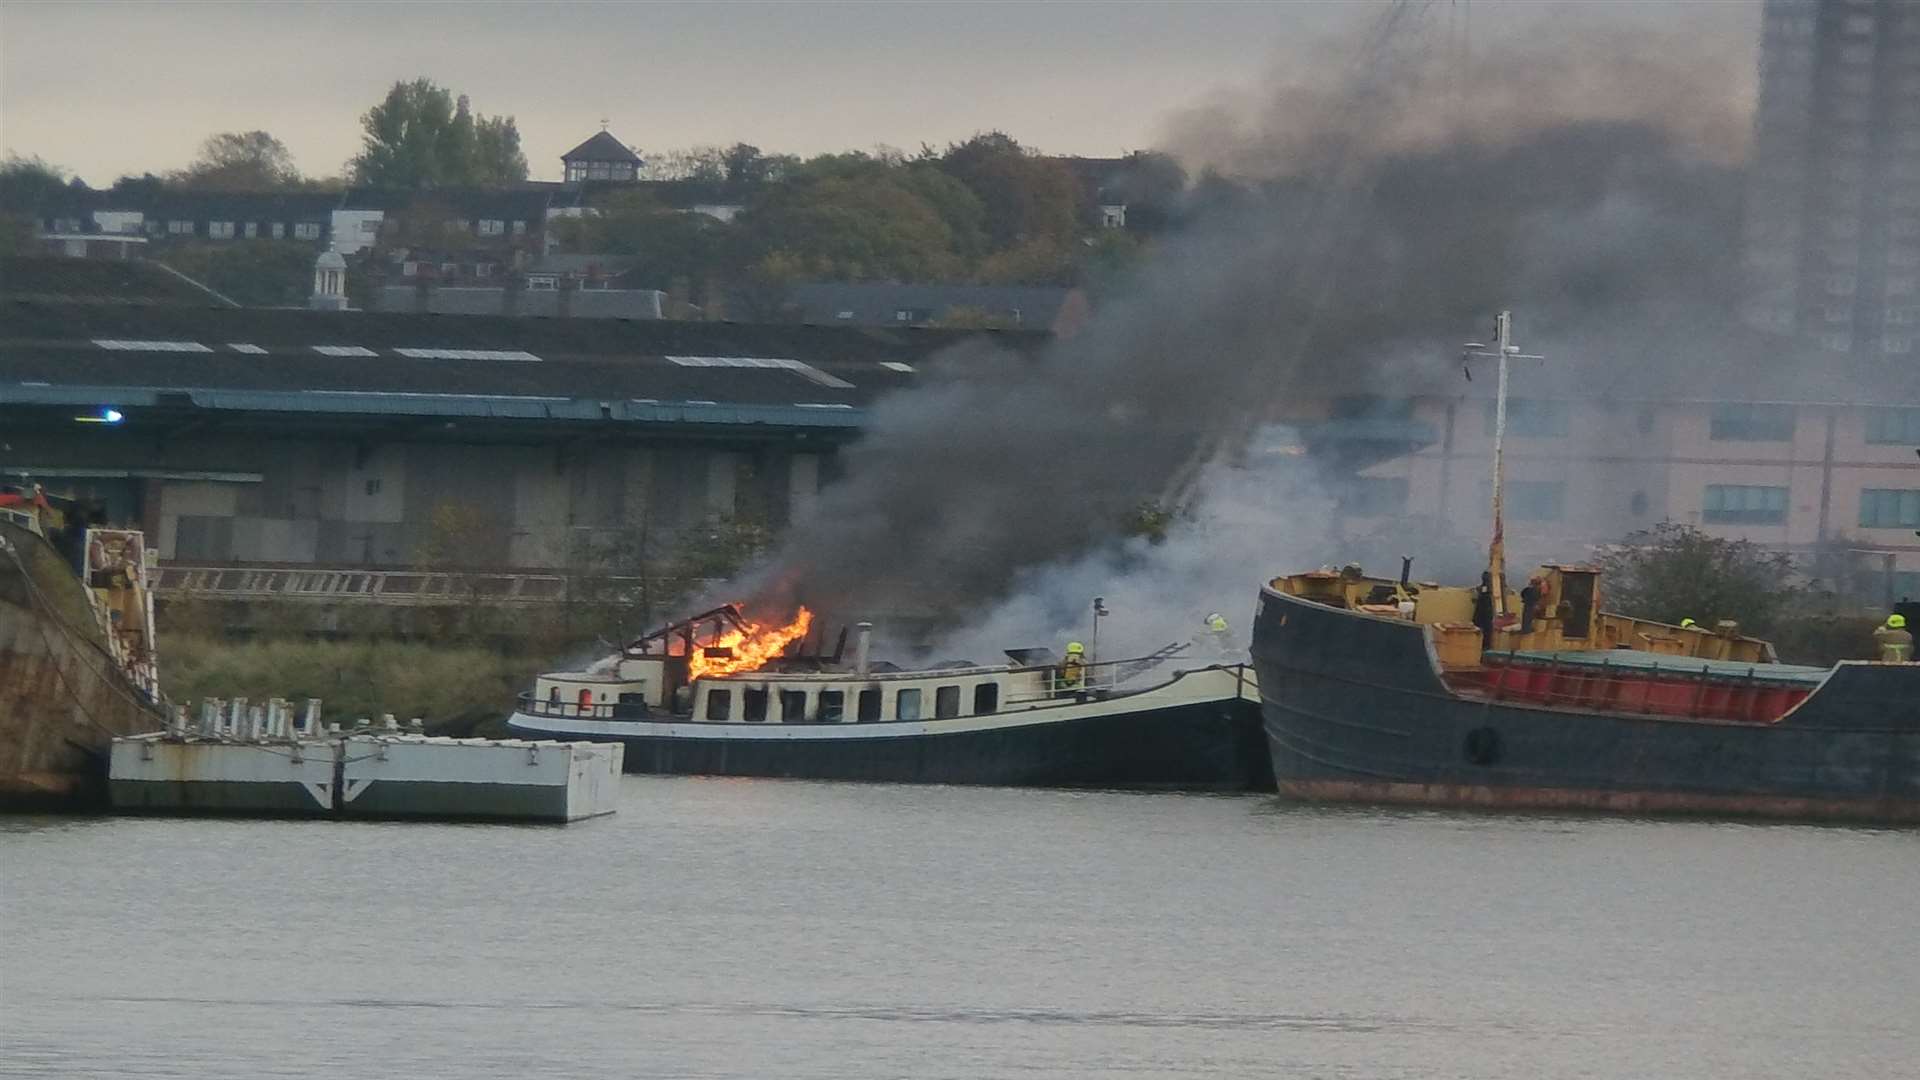 A 40 foot barge was set alight on Sunday. Picture: Nigel Crisp